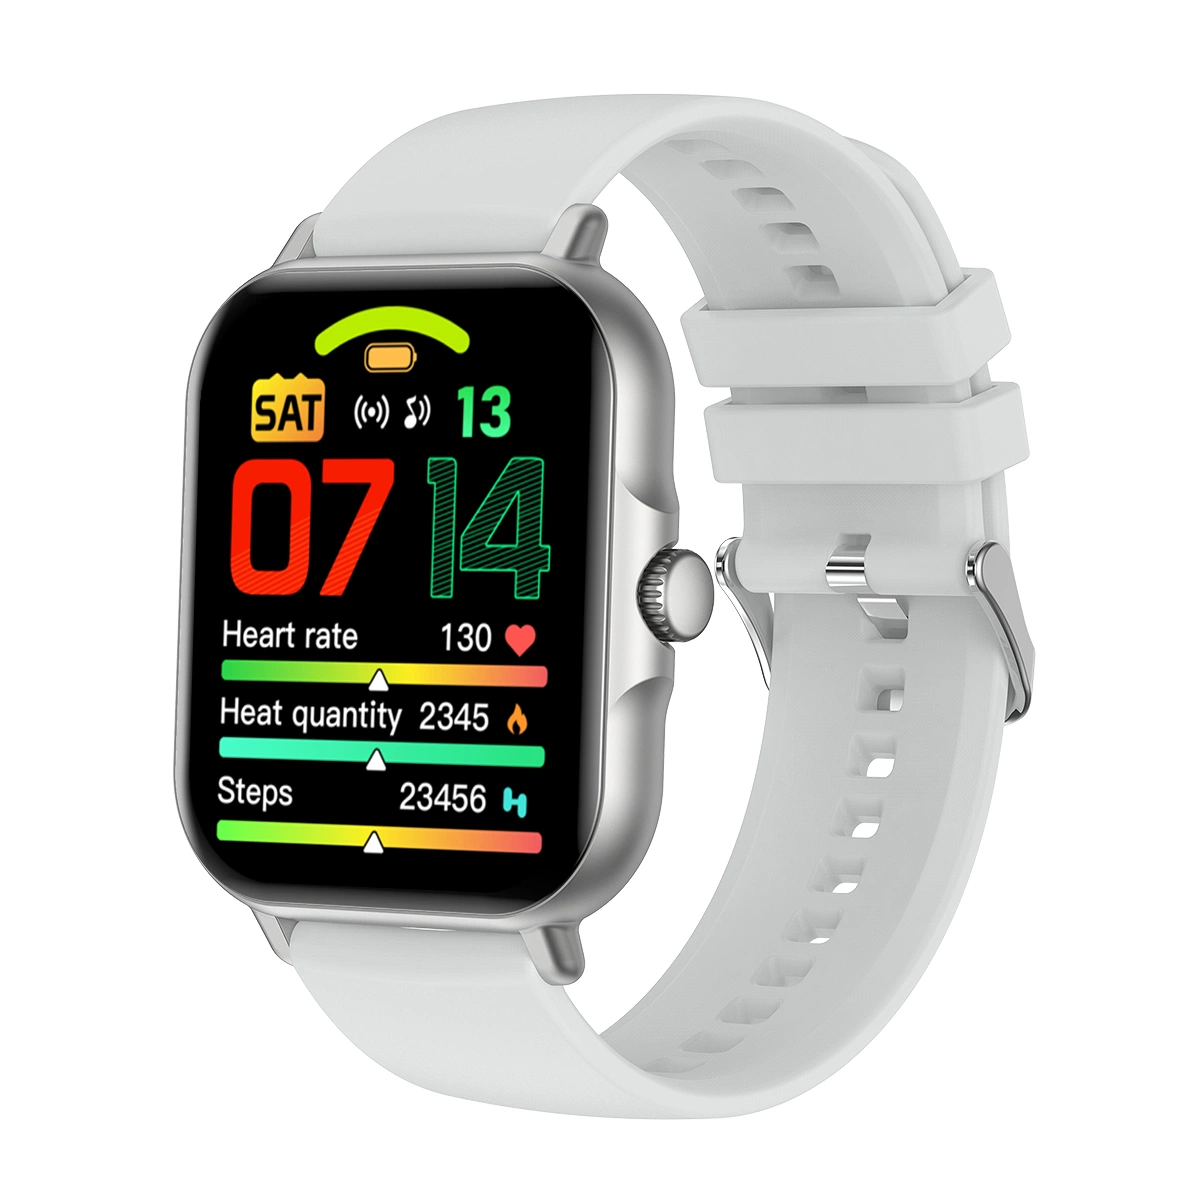 Touch Screen Digital Wrist Smart Watch for Android Apple Ios Mobile Phone Watch Wholesale/Supplier Fashion Sport Gift Smart Watch Price